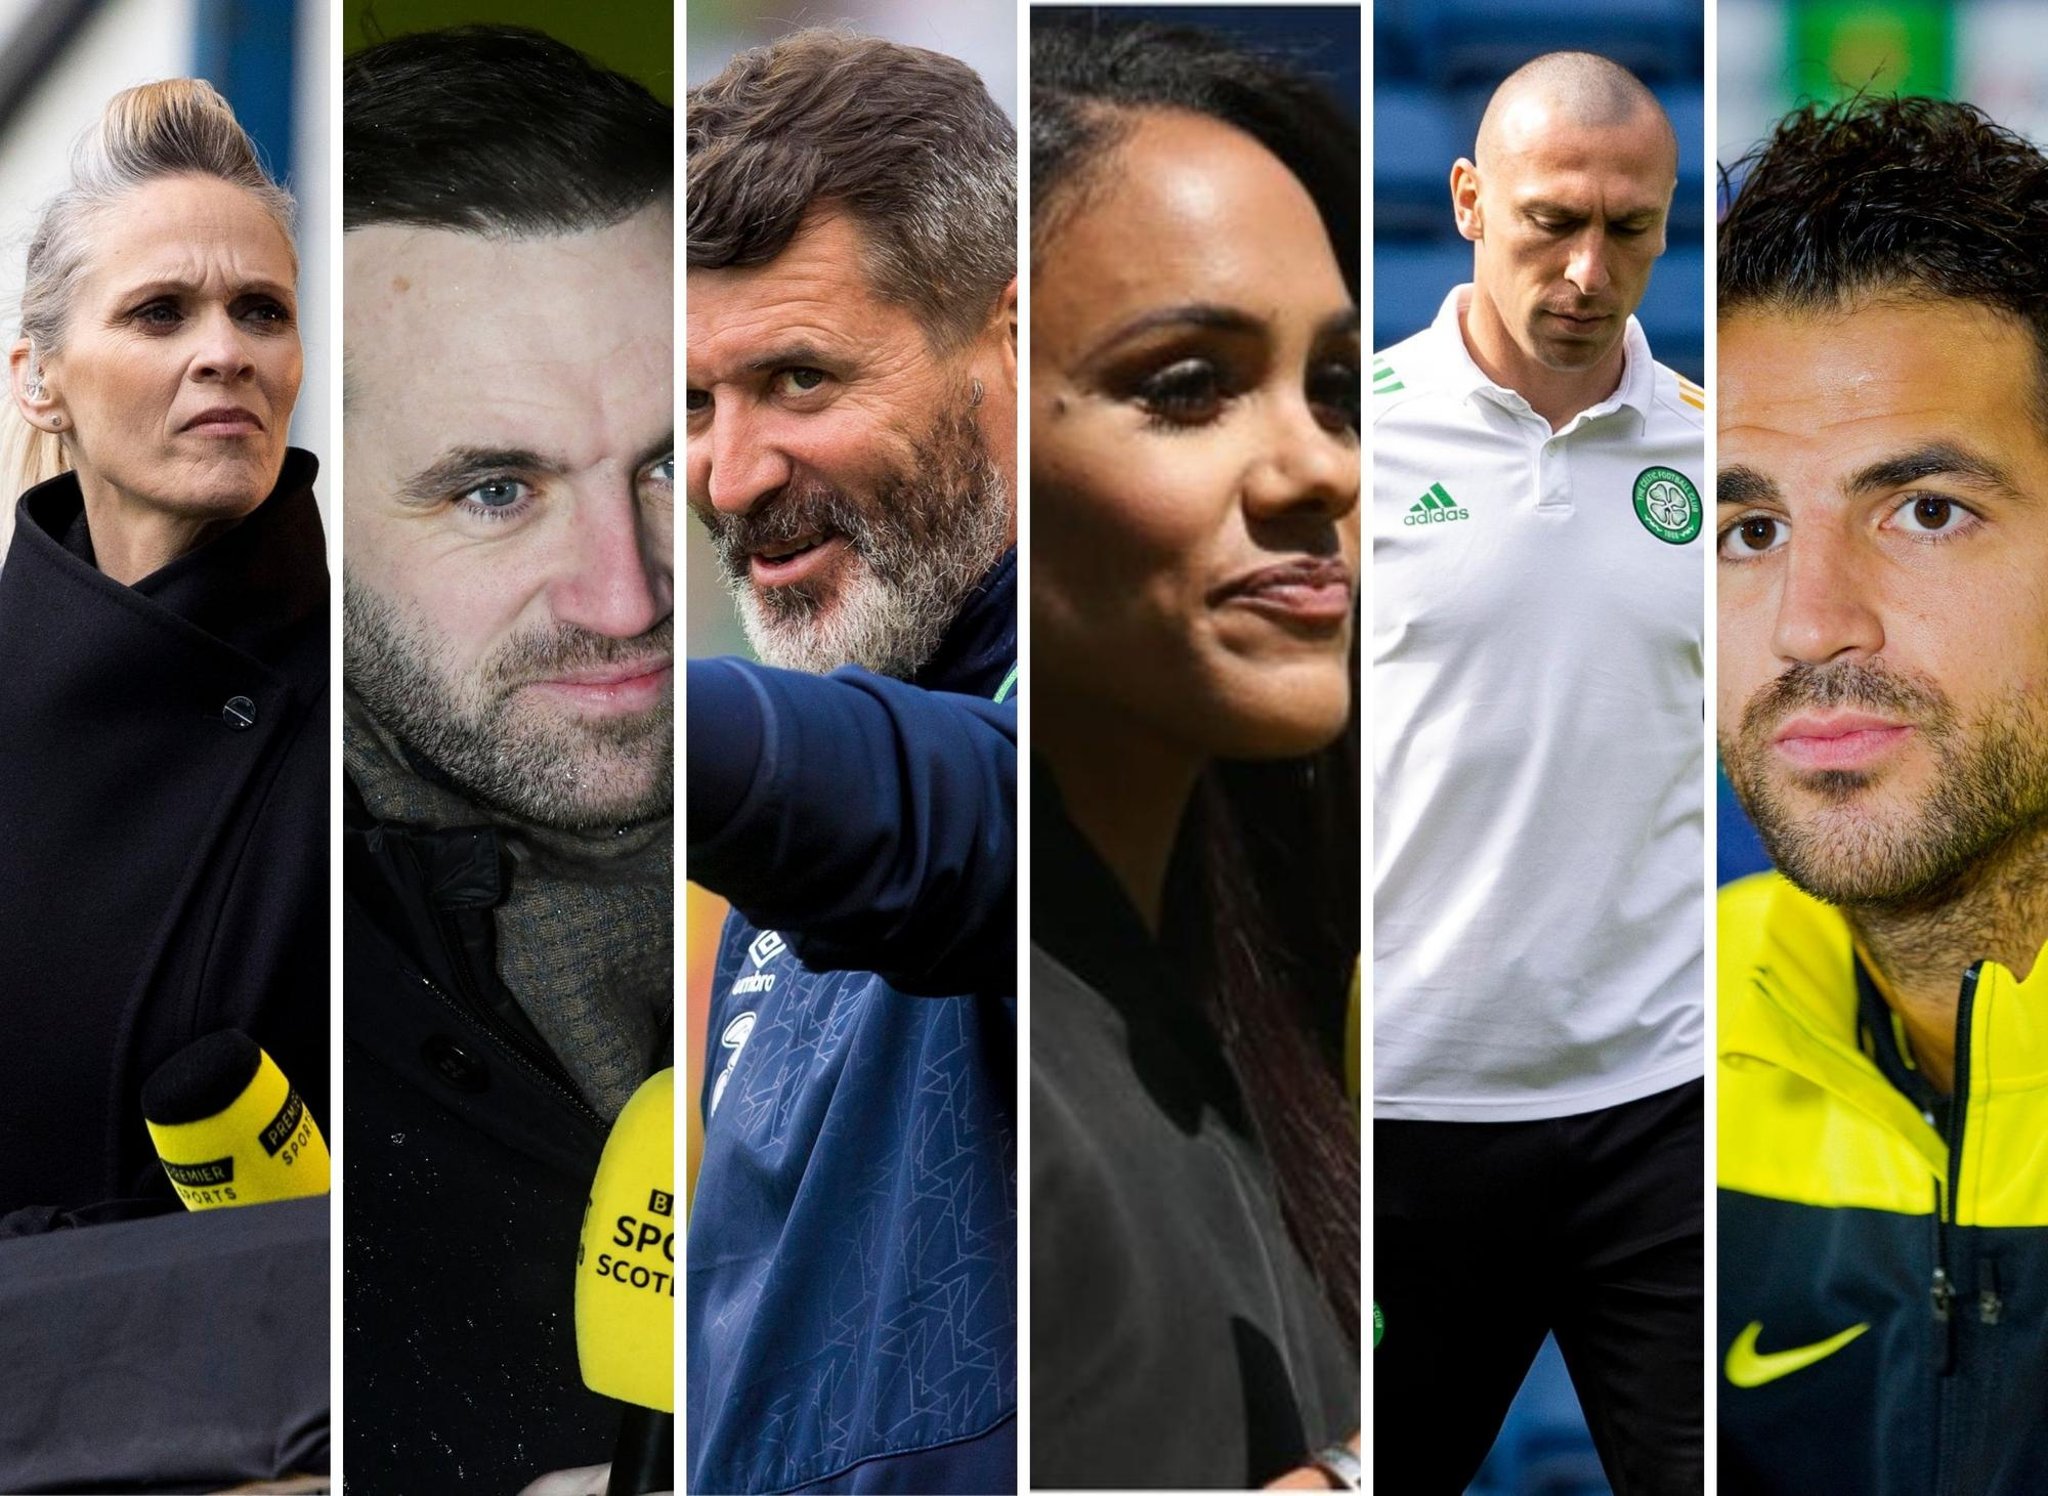 Euro Uk Tv Pundits Who Are The Pundits On Itv And c For This Year S Tournament The Scotsman